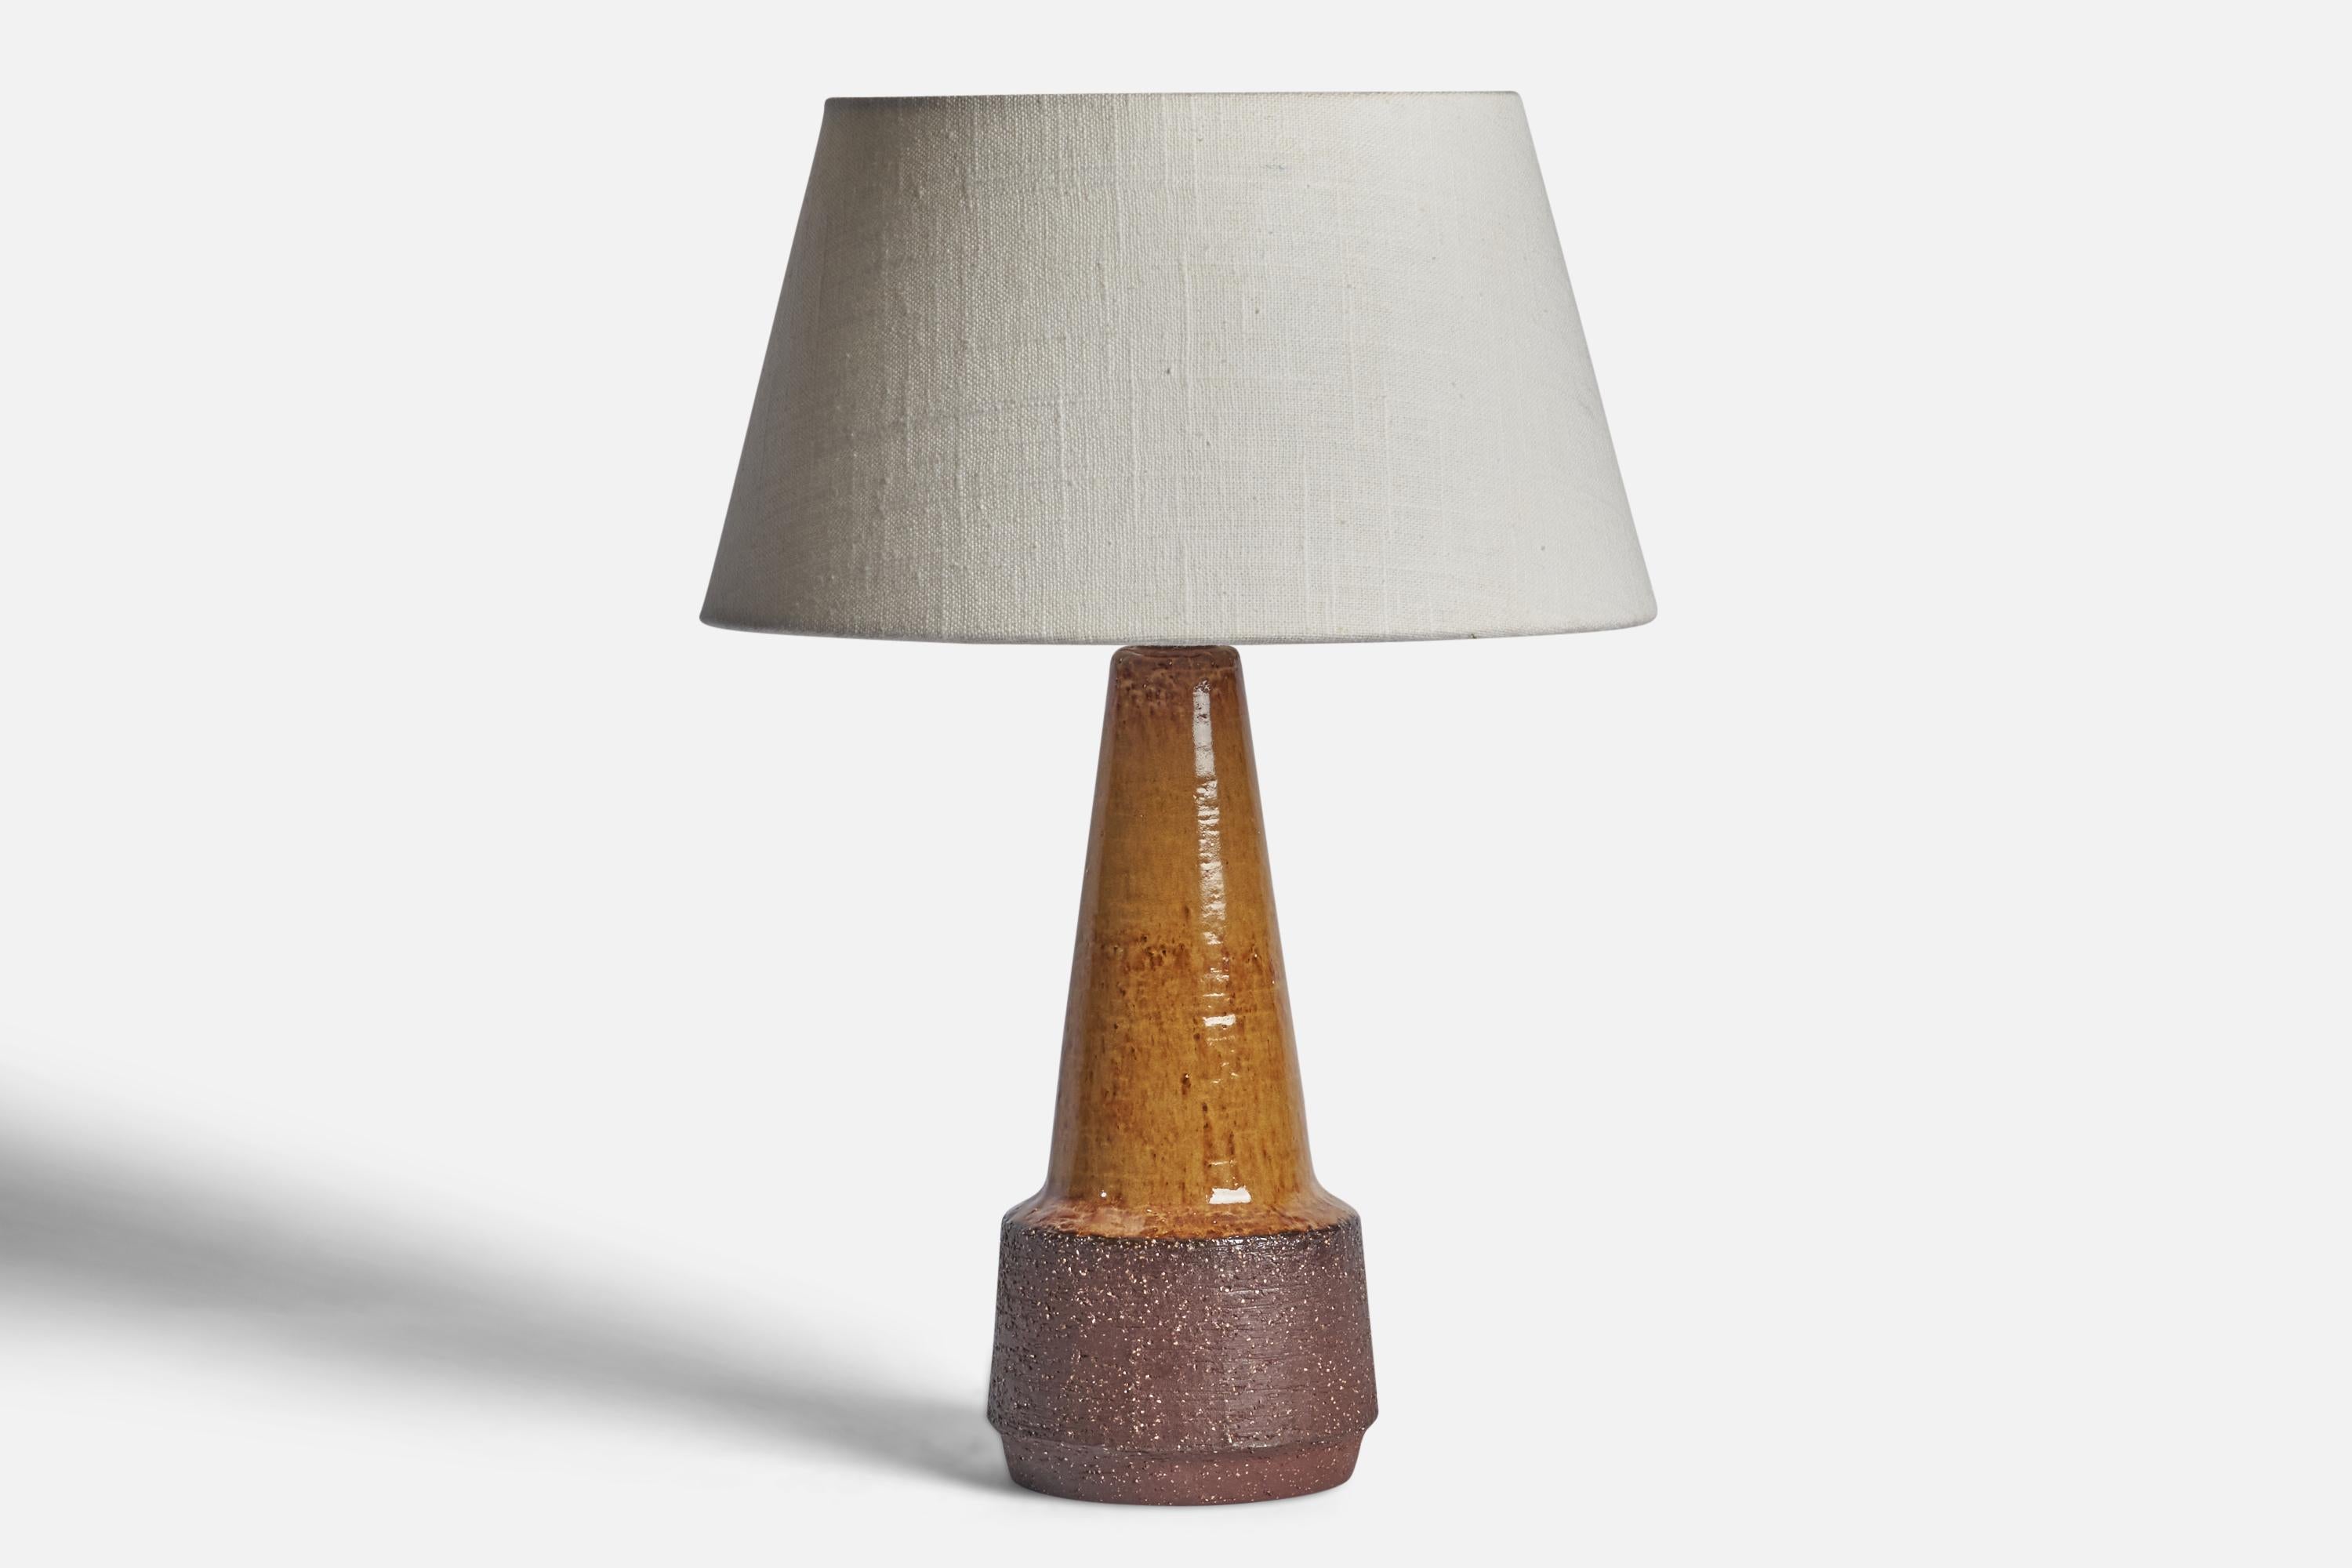 A brown semi-glazed stoneware table lamp designed and produced by Michael Andersen, Bornholm, Denmark, c. 1960s.

Dimensions of Lamp (inches): 11.65